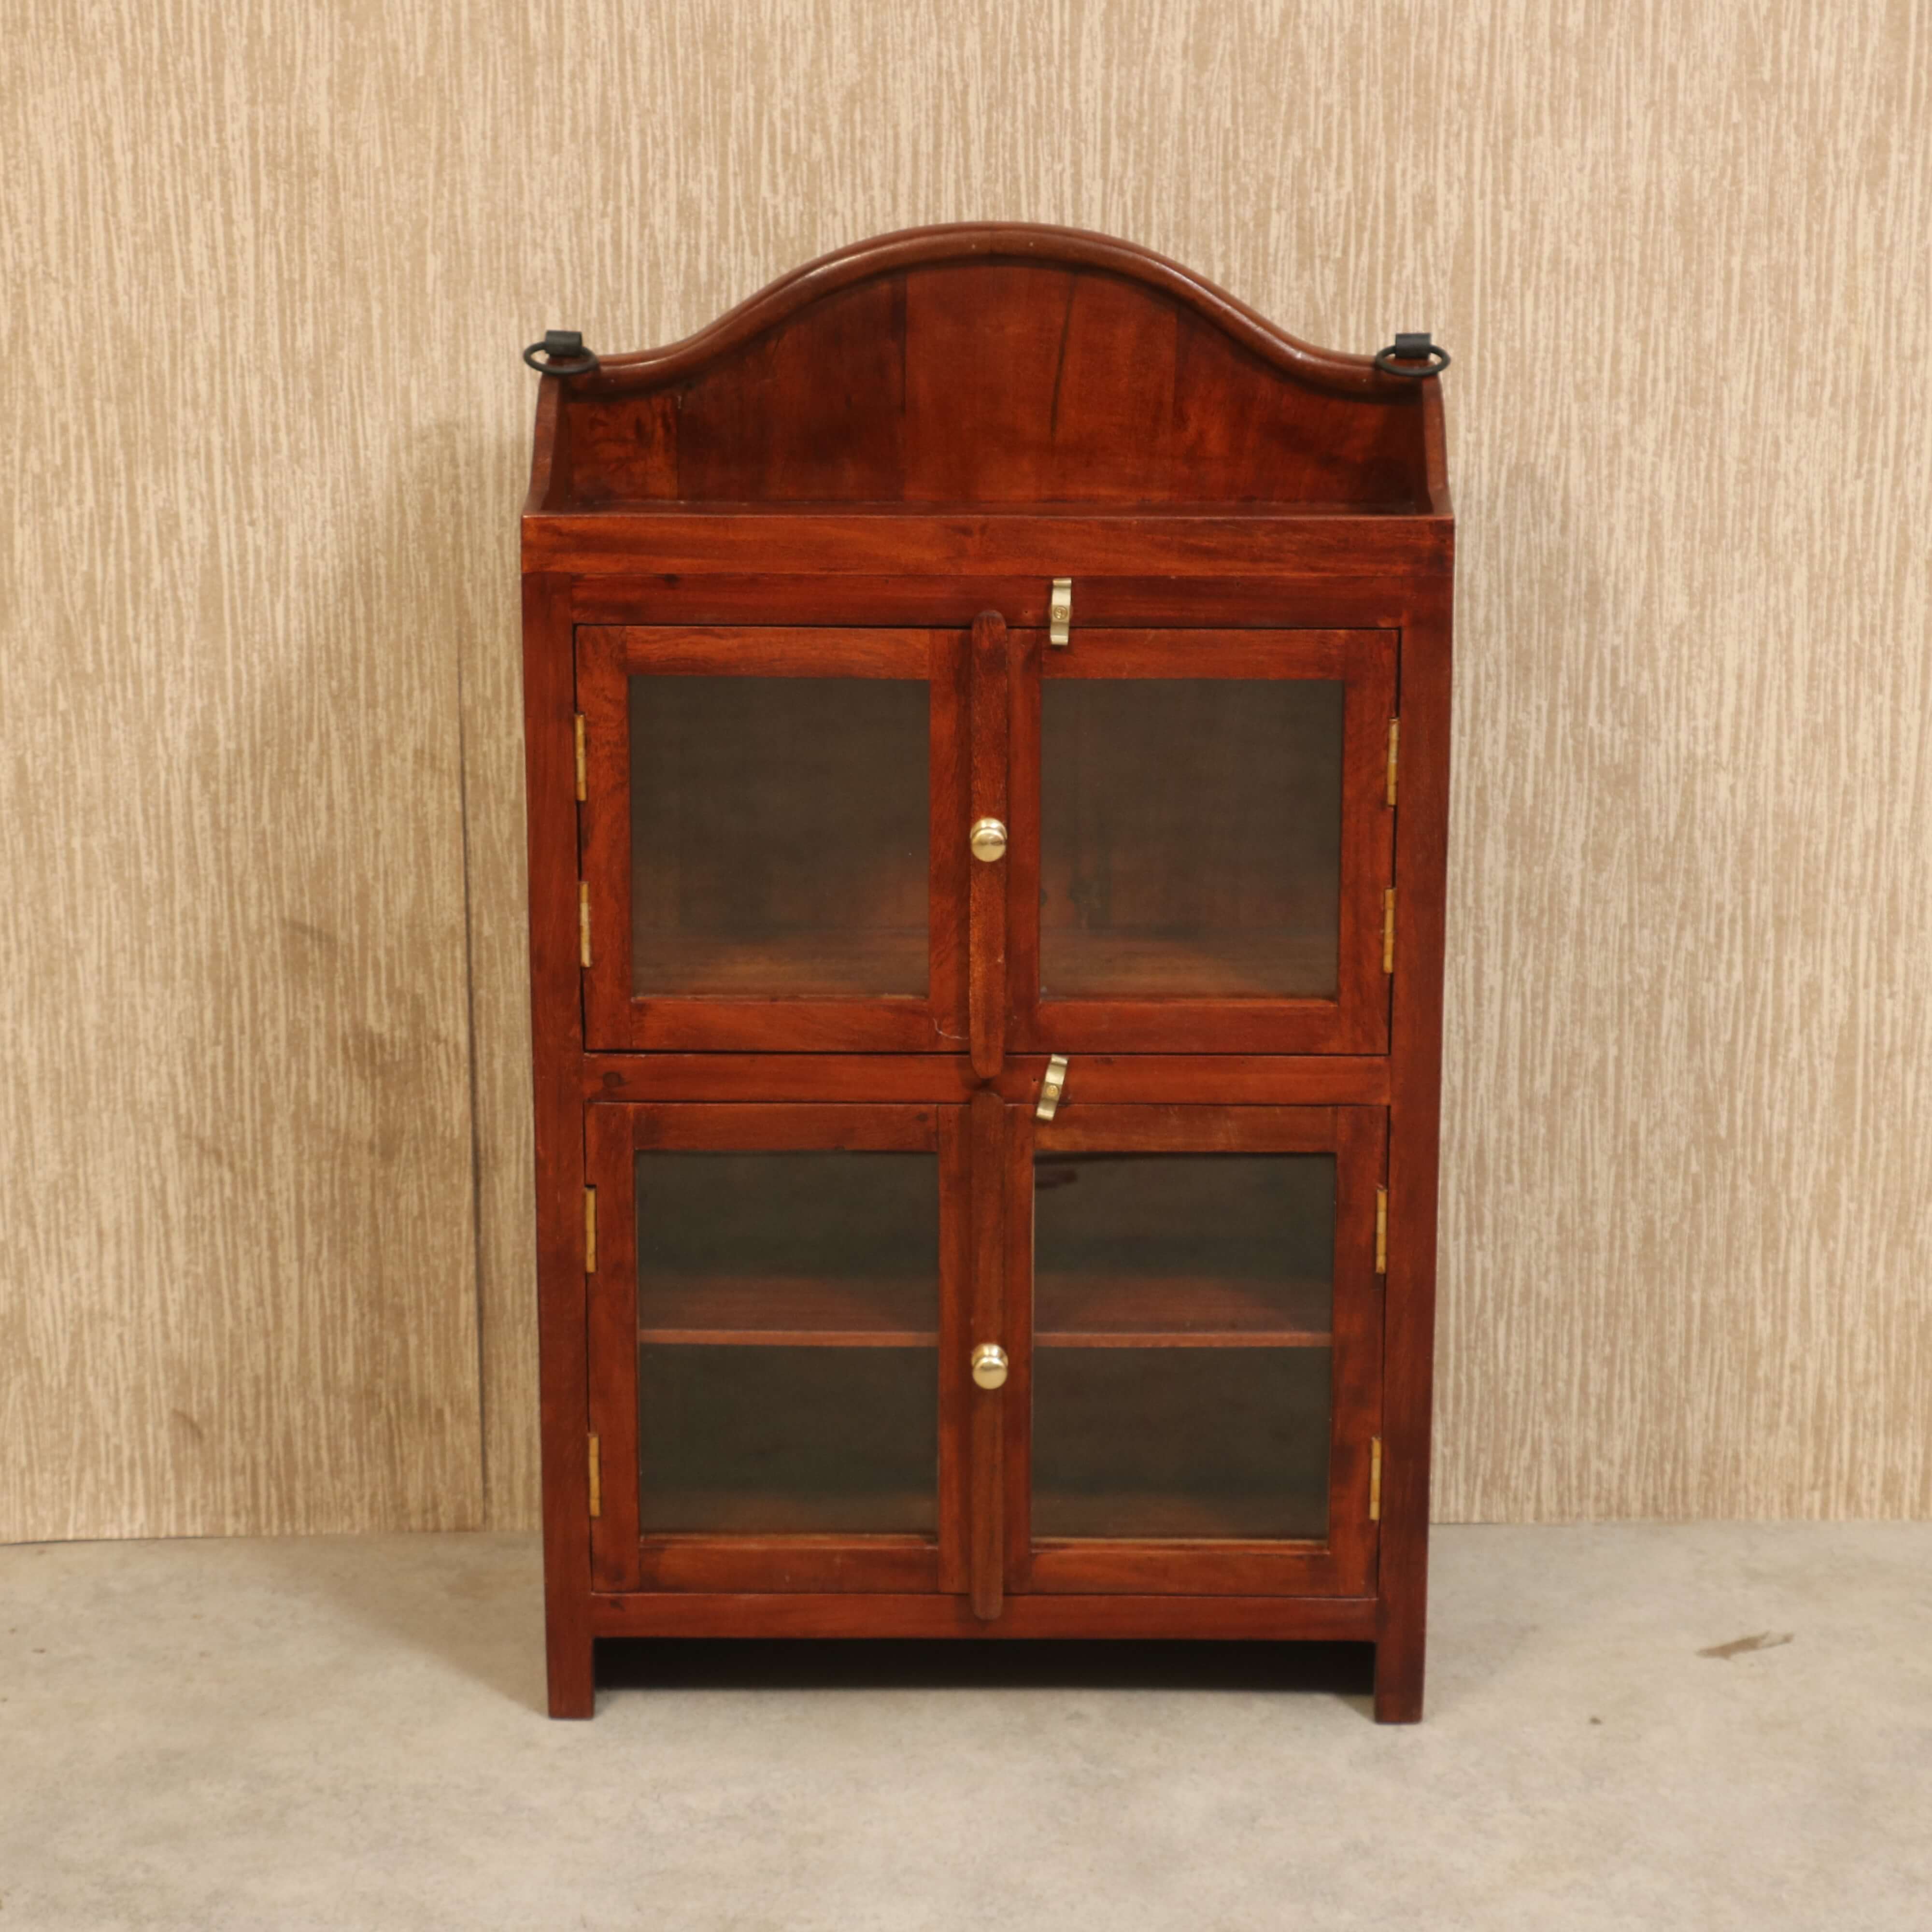 Two Partition + 1 Shelf at Down + 1 Tray Simple Glass and Wooden Cabinet Wall Cabinet